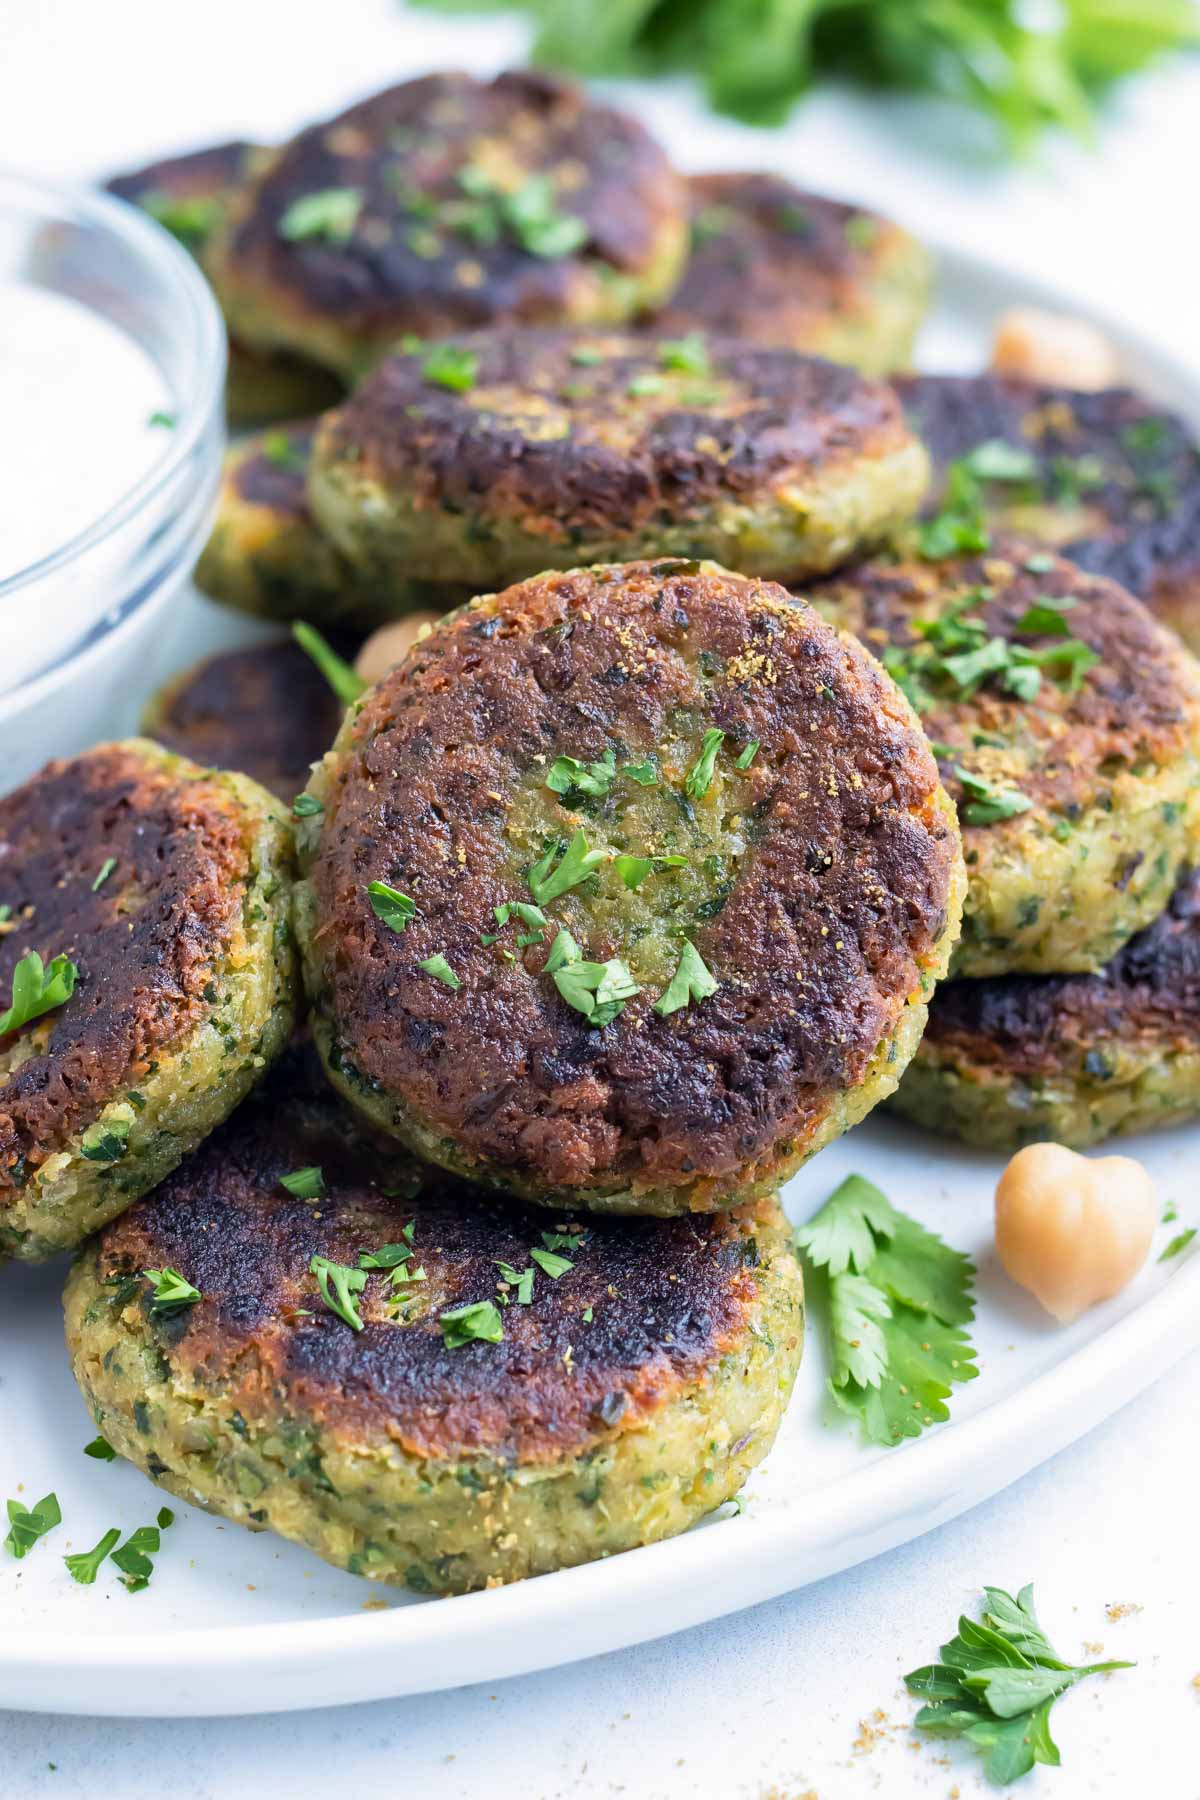 Vegan homemade falafel with fresh parsley and chickpeas are plated with a greek yogurt sauce.